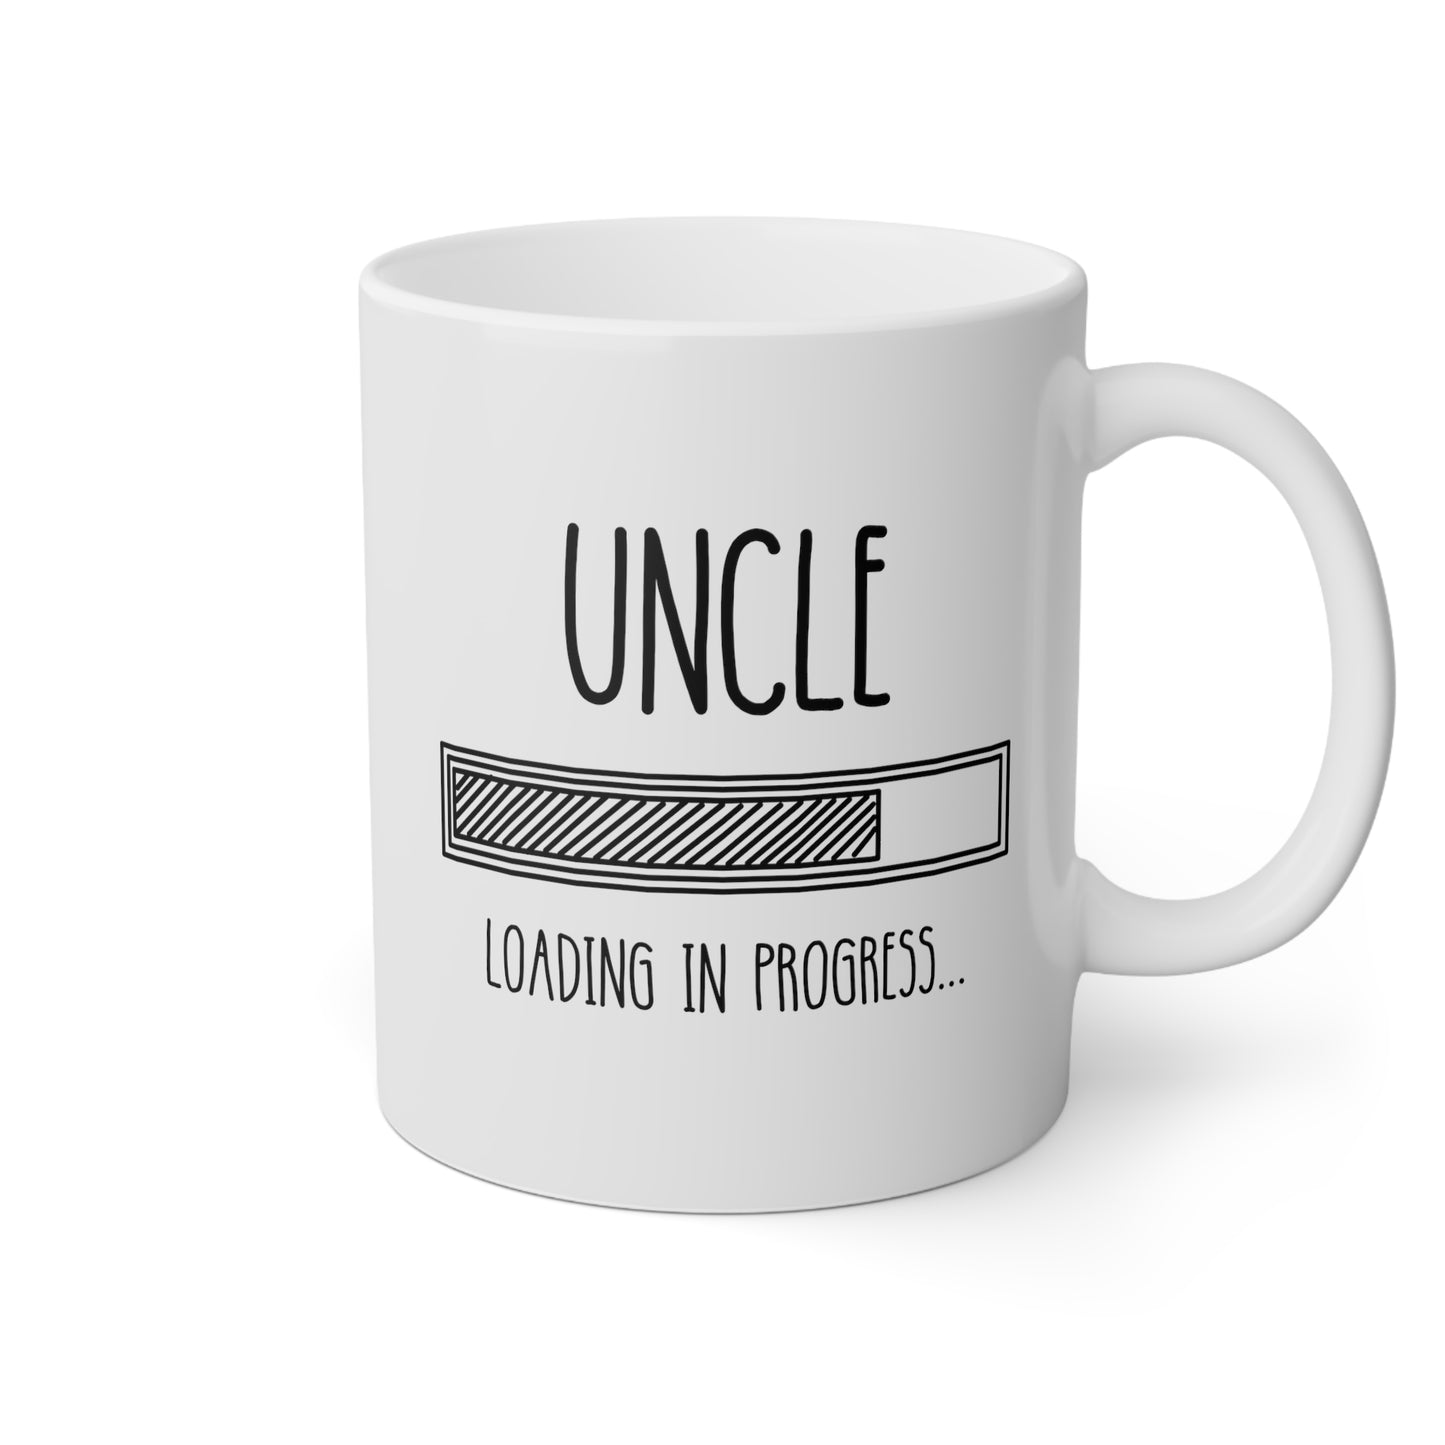 Uncle Loading In Progress 11oz white funny large coffee mug gift for uncle to be pregnancy reveal announcement promoted waveywares wavey wares wavywares wavy wares